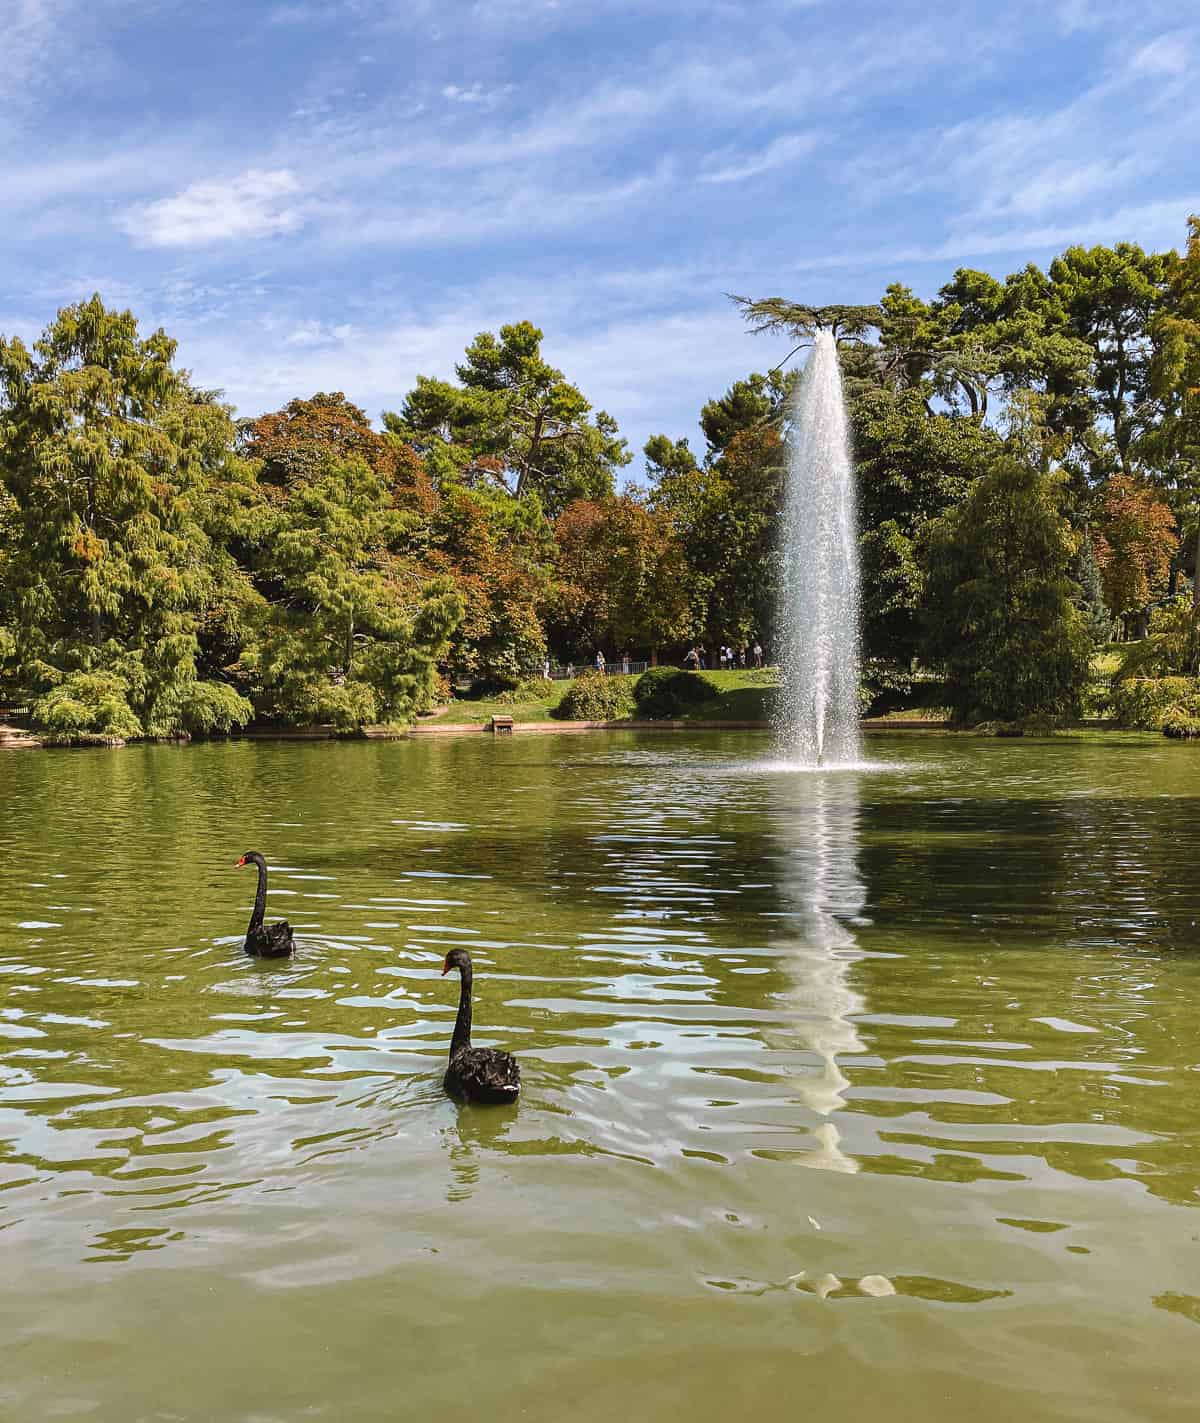 beautiful pond with black ducks swimming and a fountain